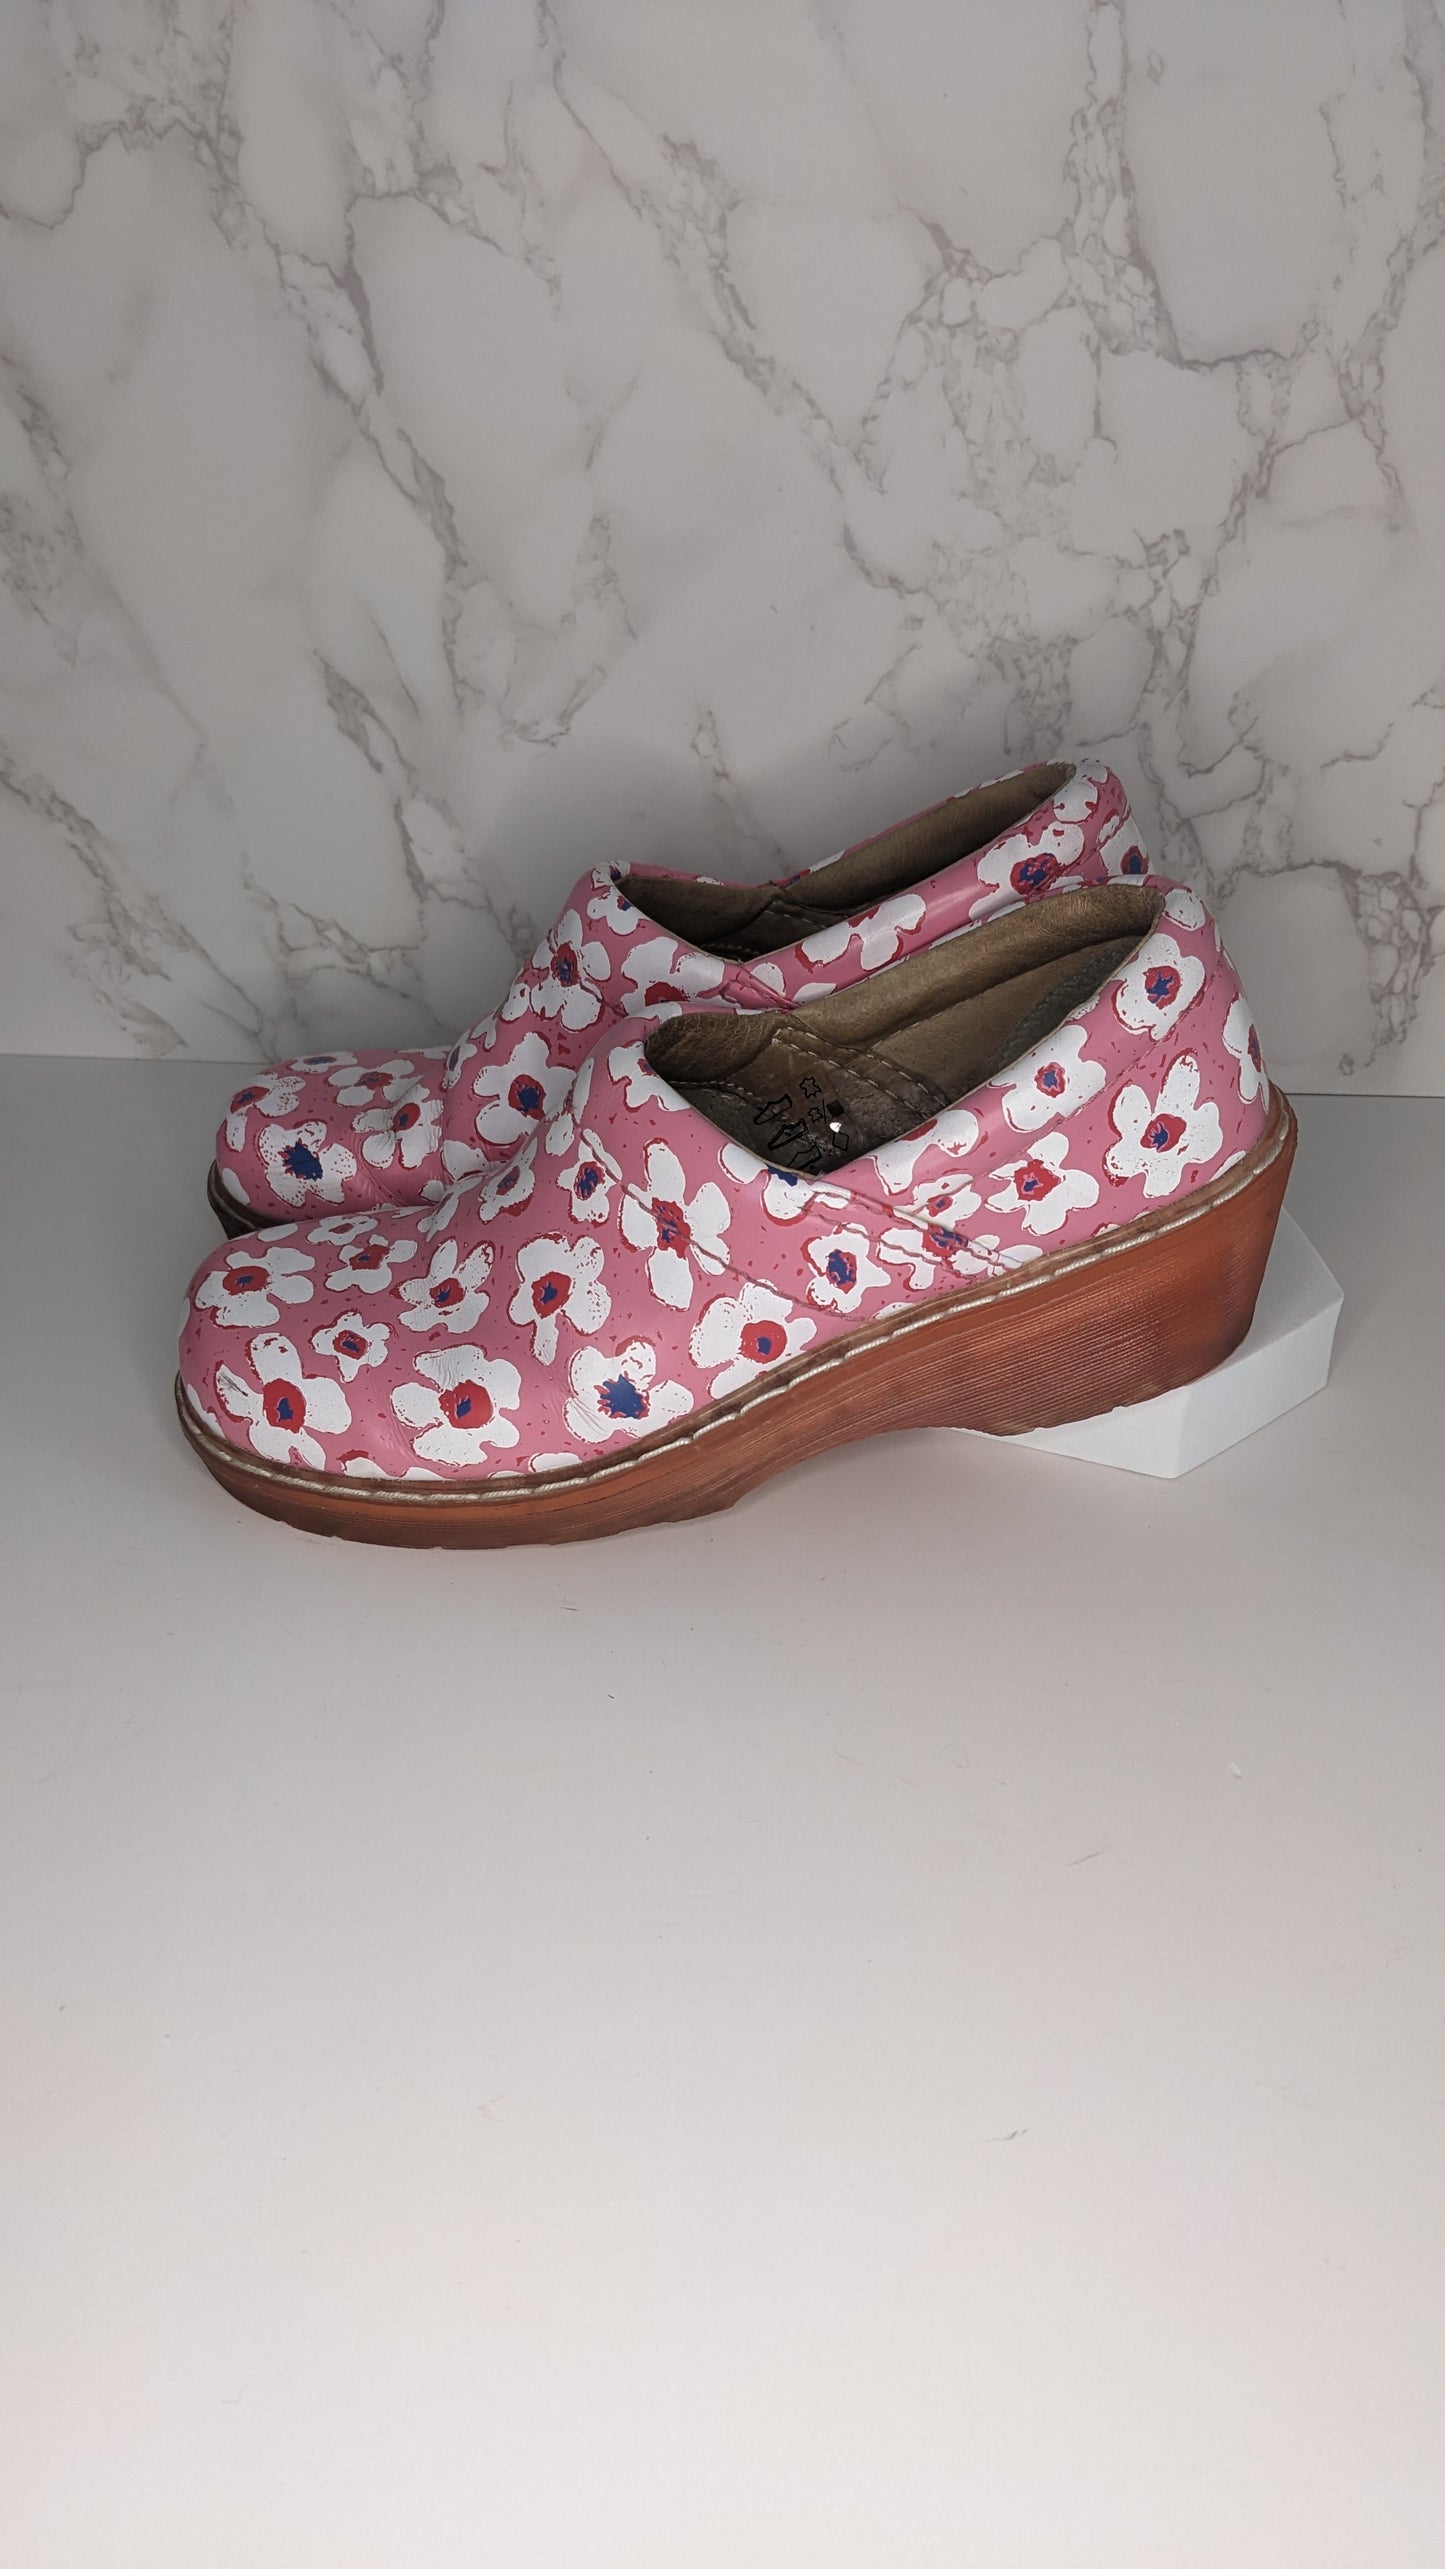 Dr. Martens Pink and White Flower Clog